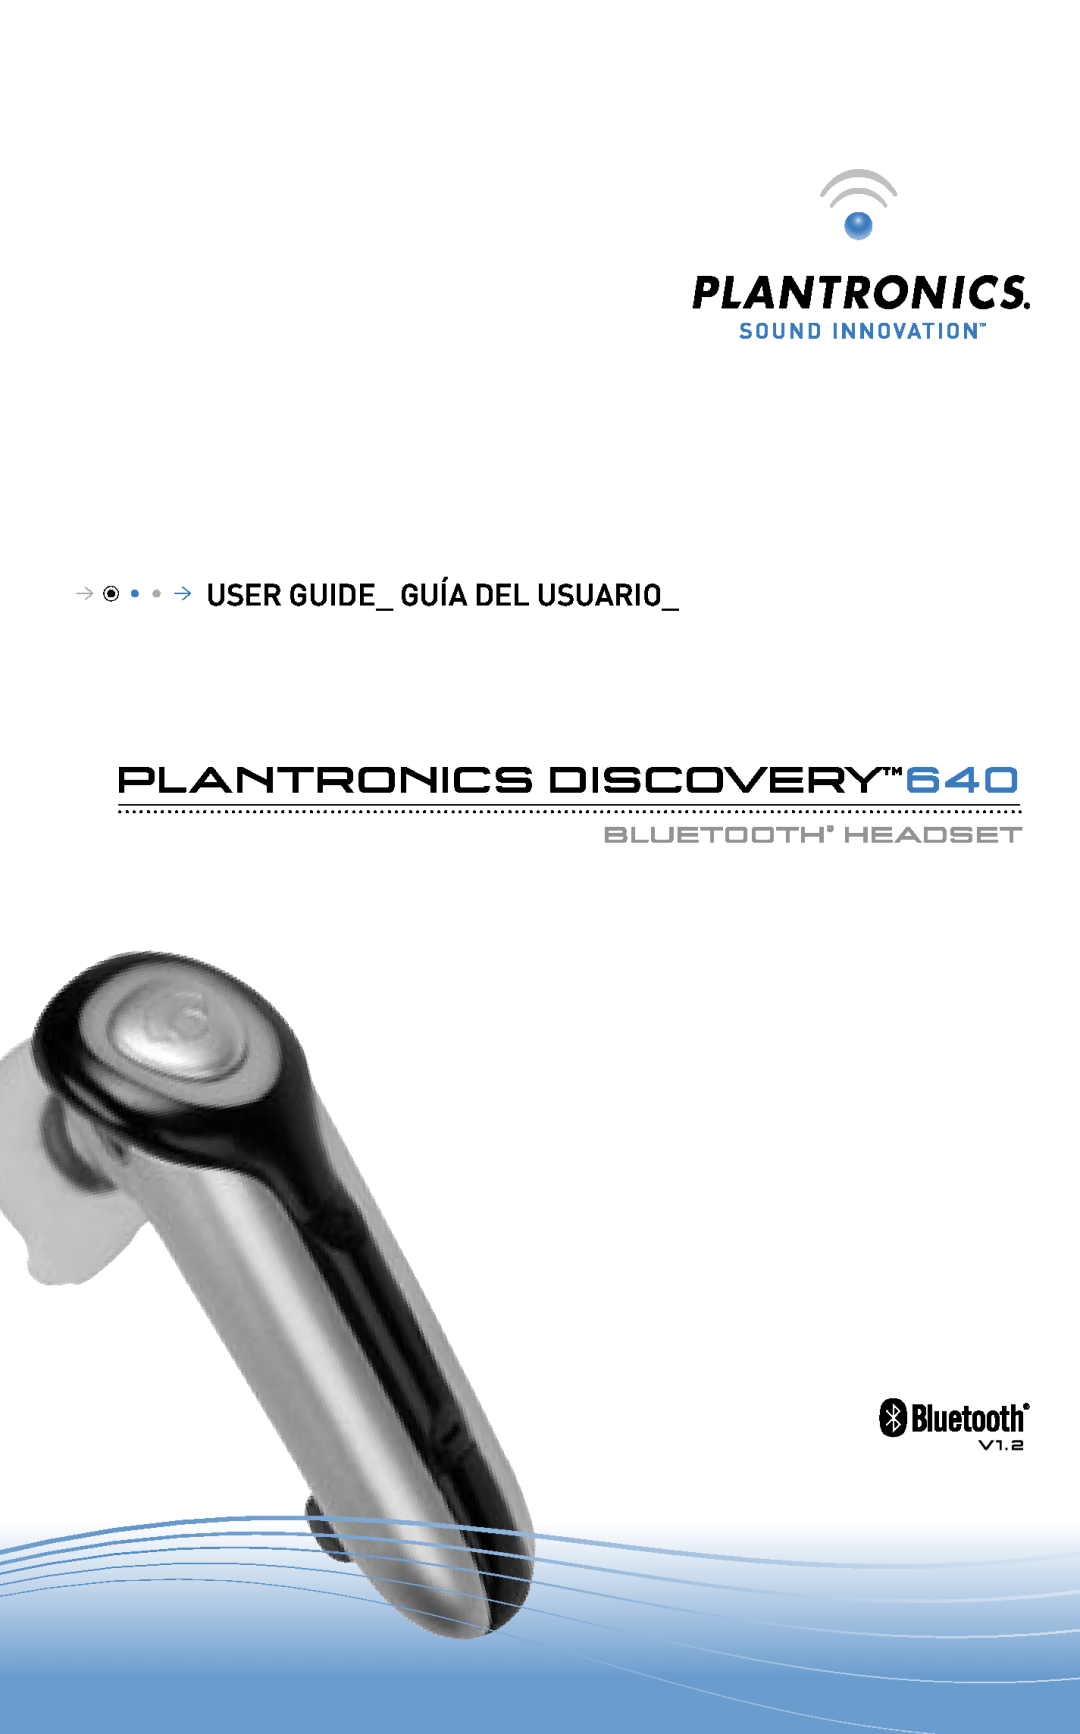 Plantronics manual PLANTRONICS DISCOVERY640, User Guide Guía Del Usuario, Bluetooth Headset 